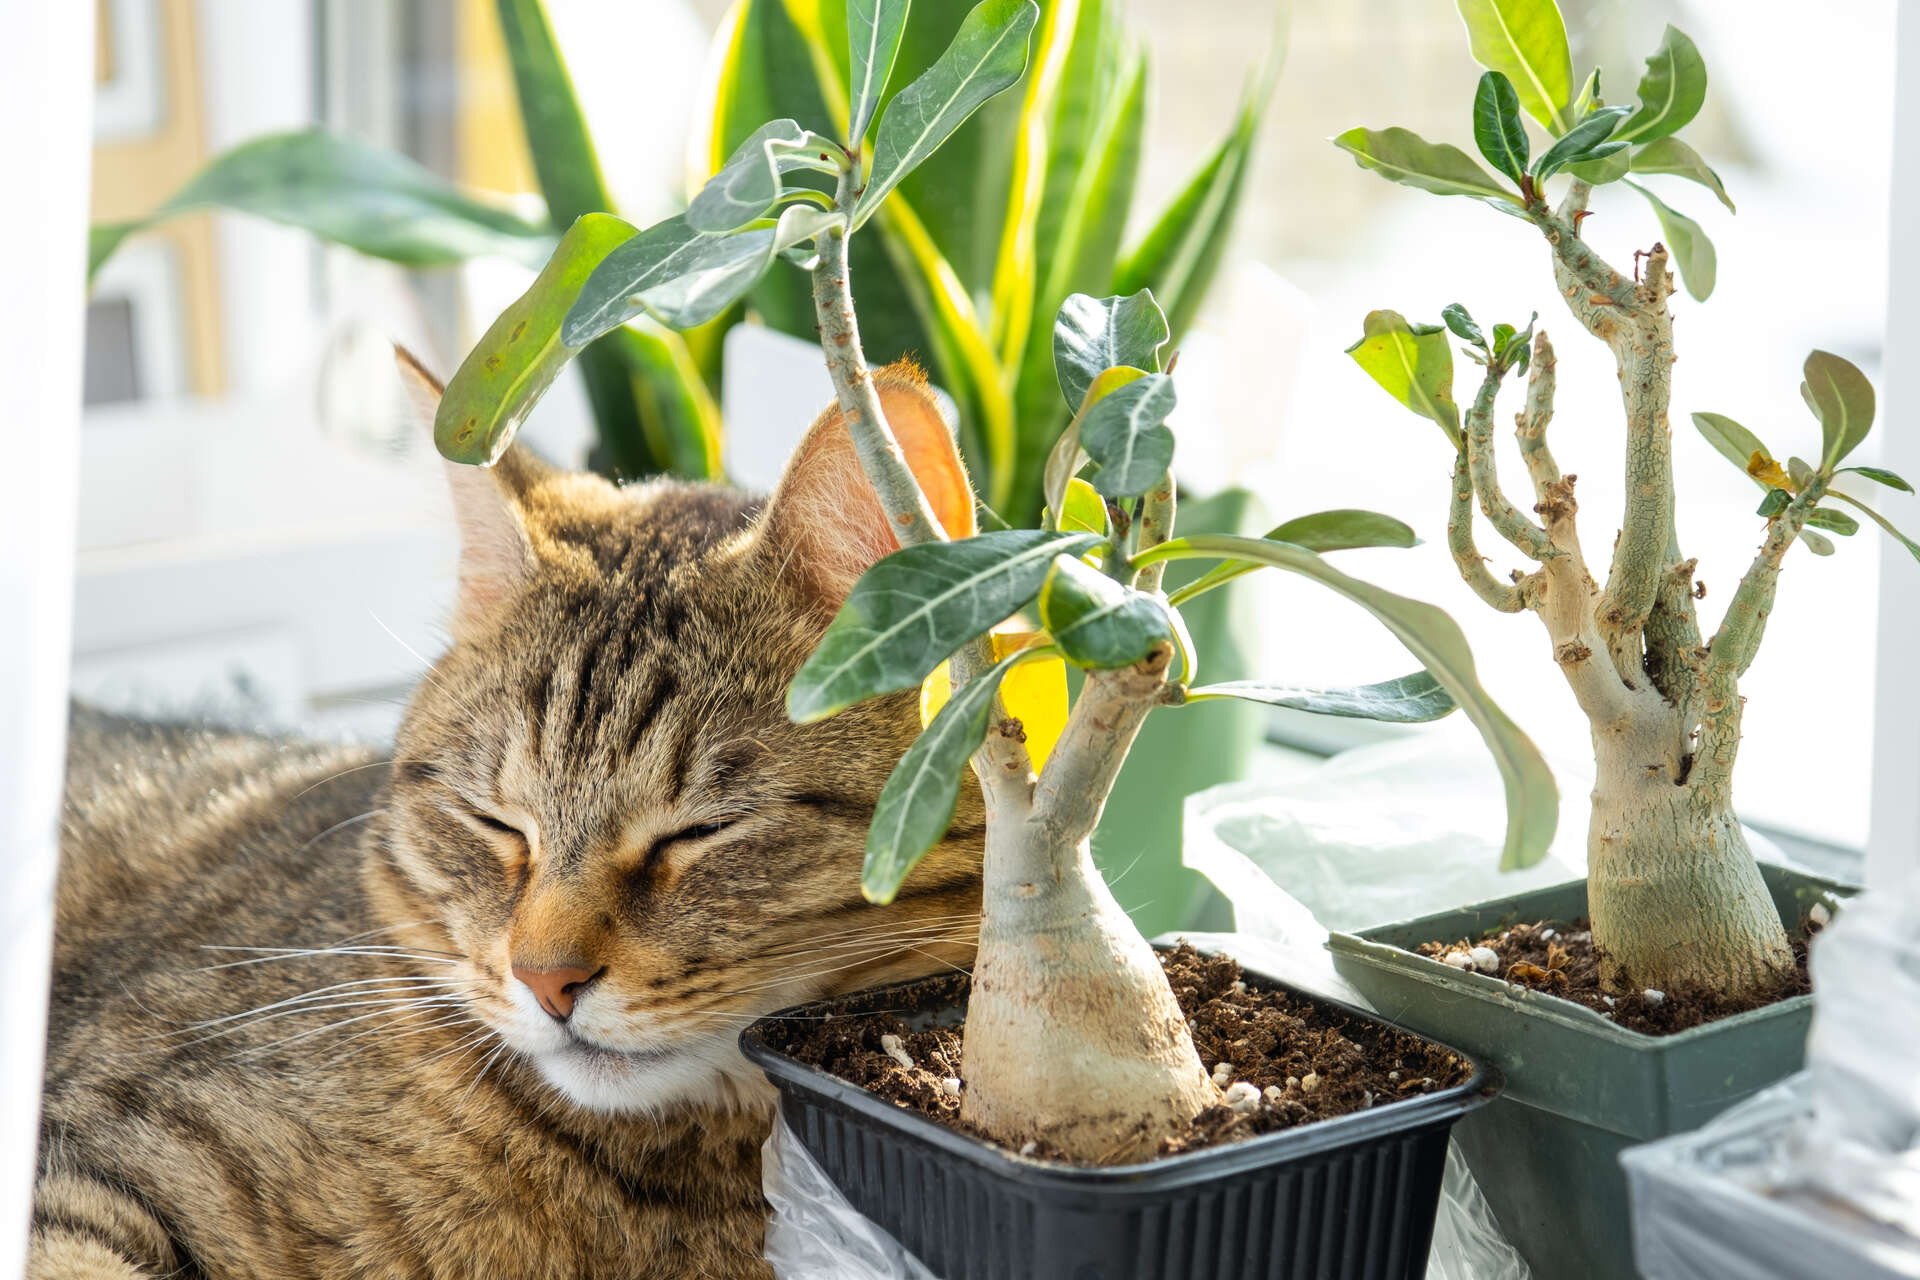 A cat sleeping against an indoor plant